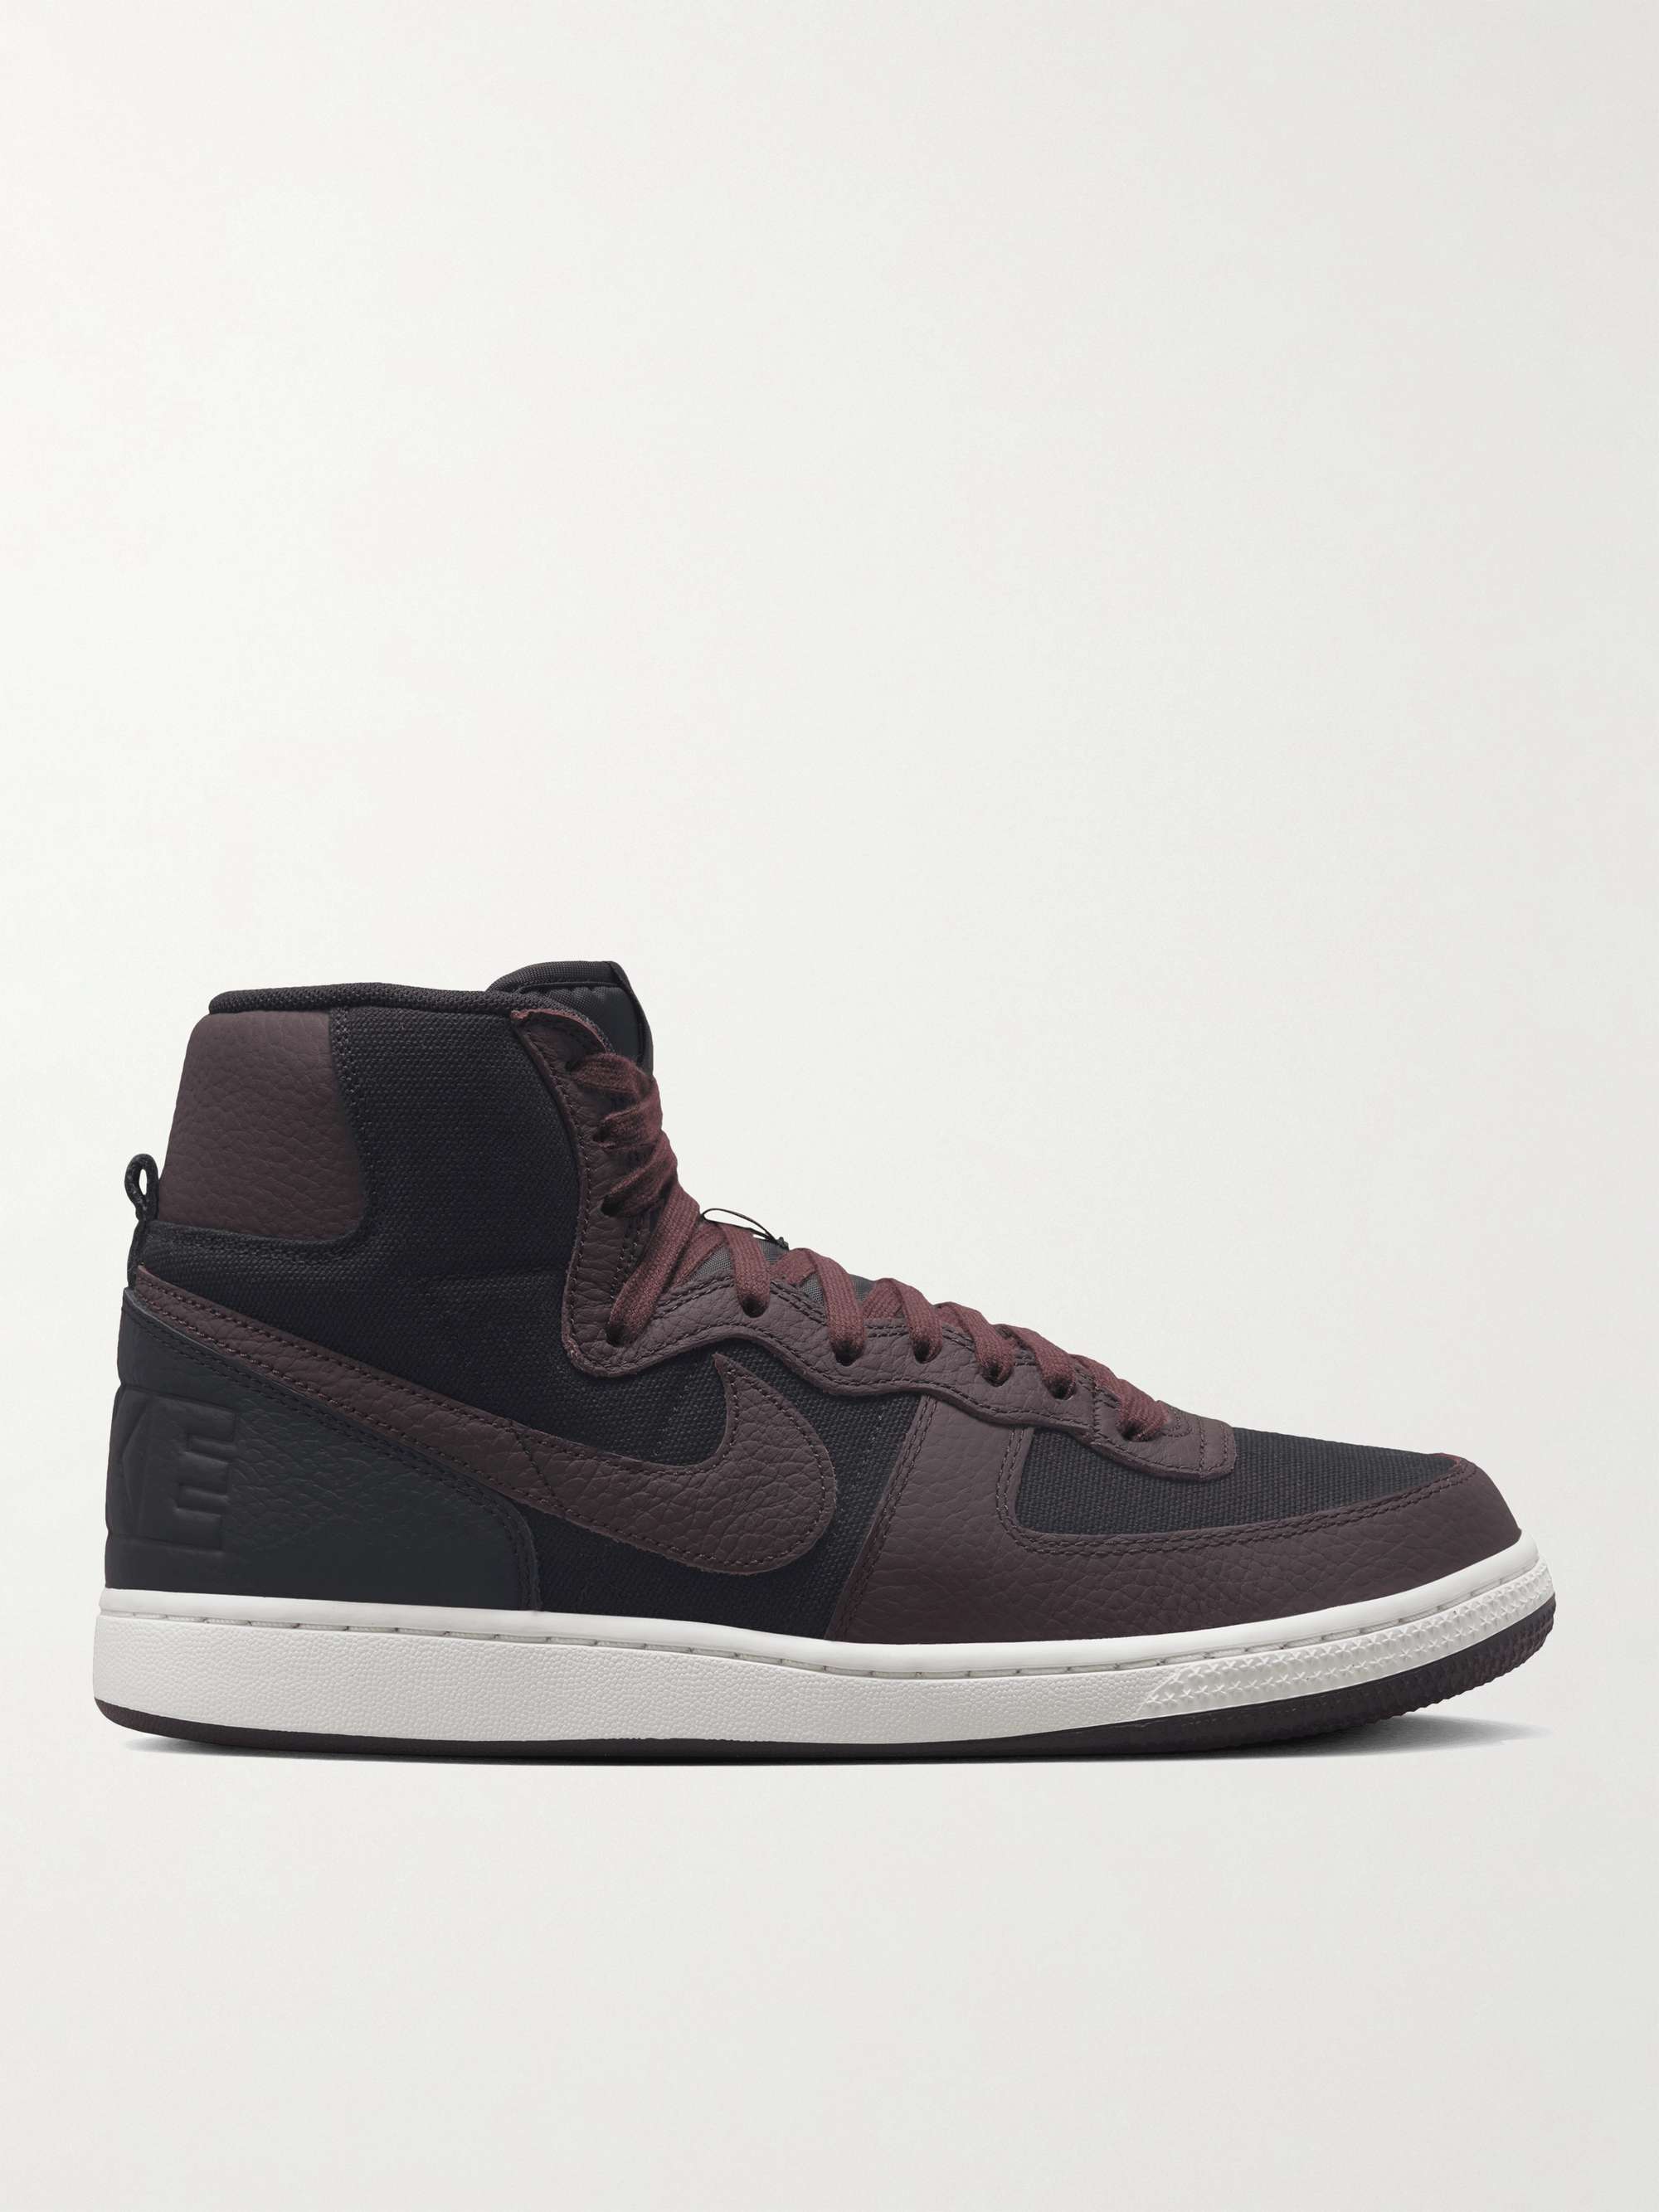 NIKE Terminator Leather-Trimmed Canvas High-Top Sneakers | MR PORTER